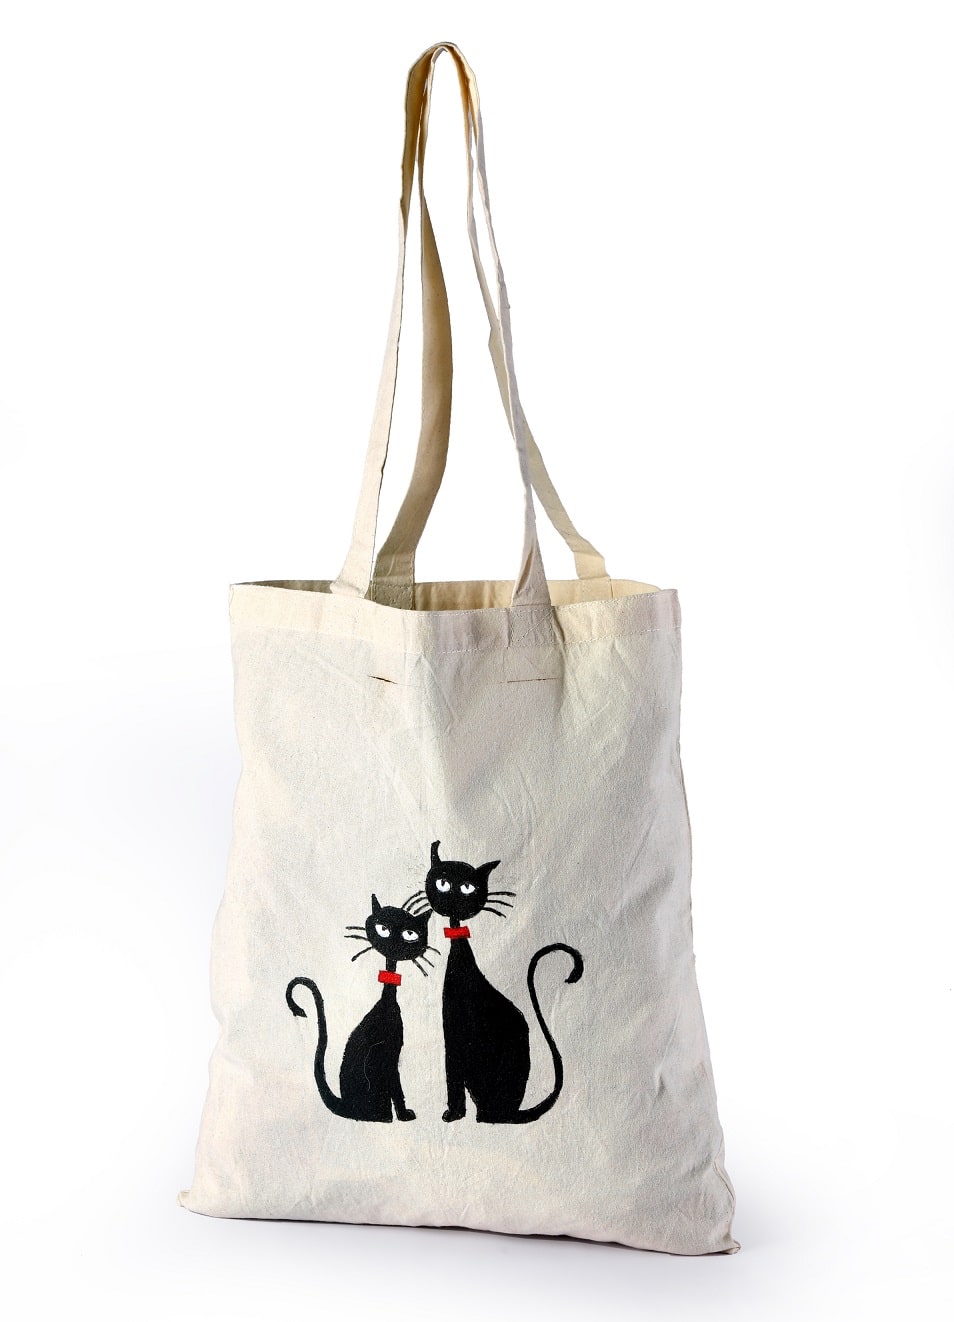 Jute Bags India Manufacturer & Exporter, Cotton Bags India, Canvas Tote